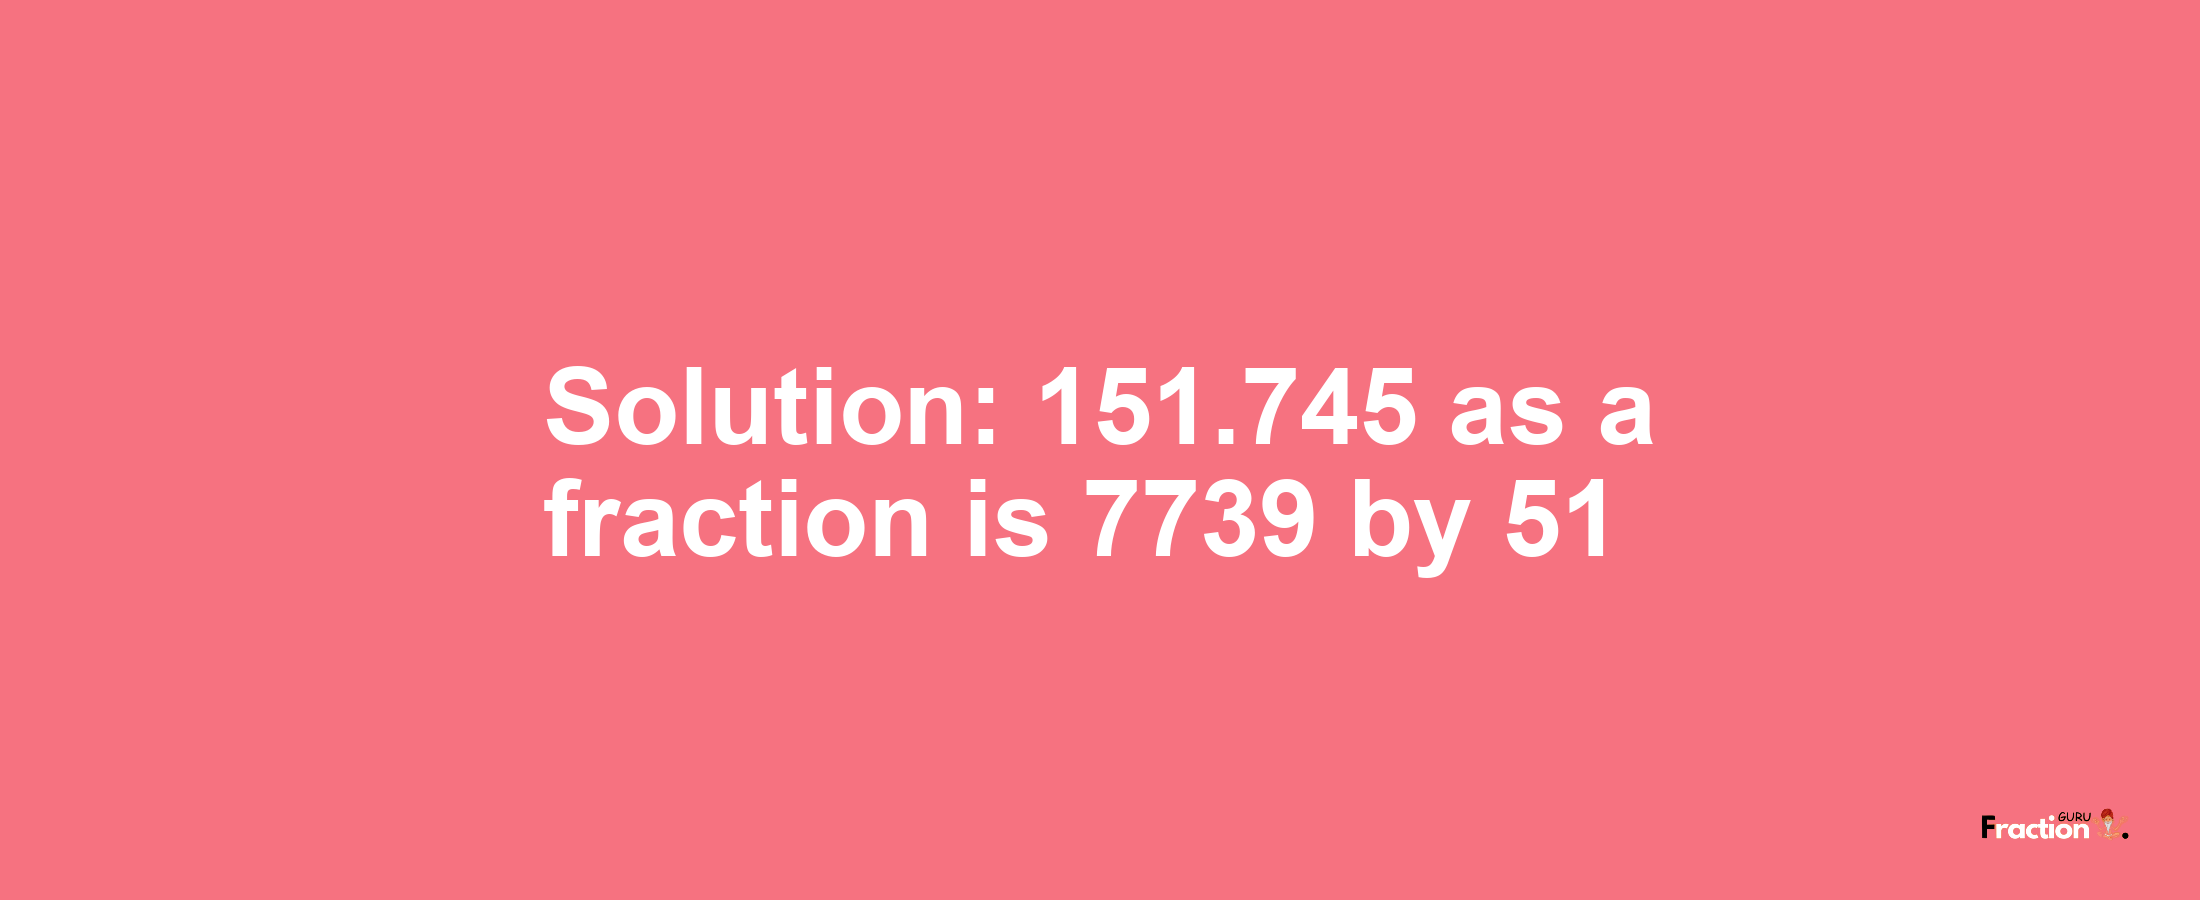 Solution:151.745 as a fraction is 7739/51